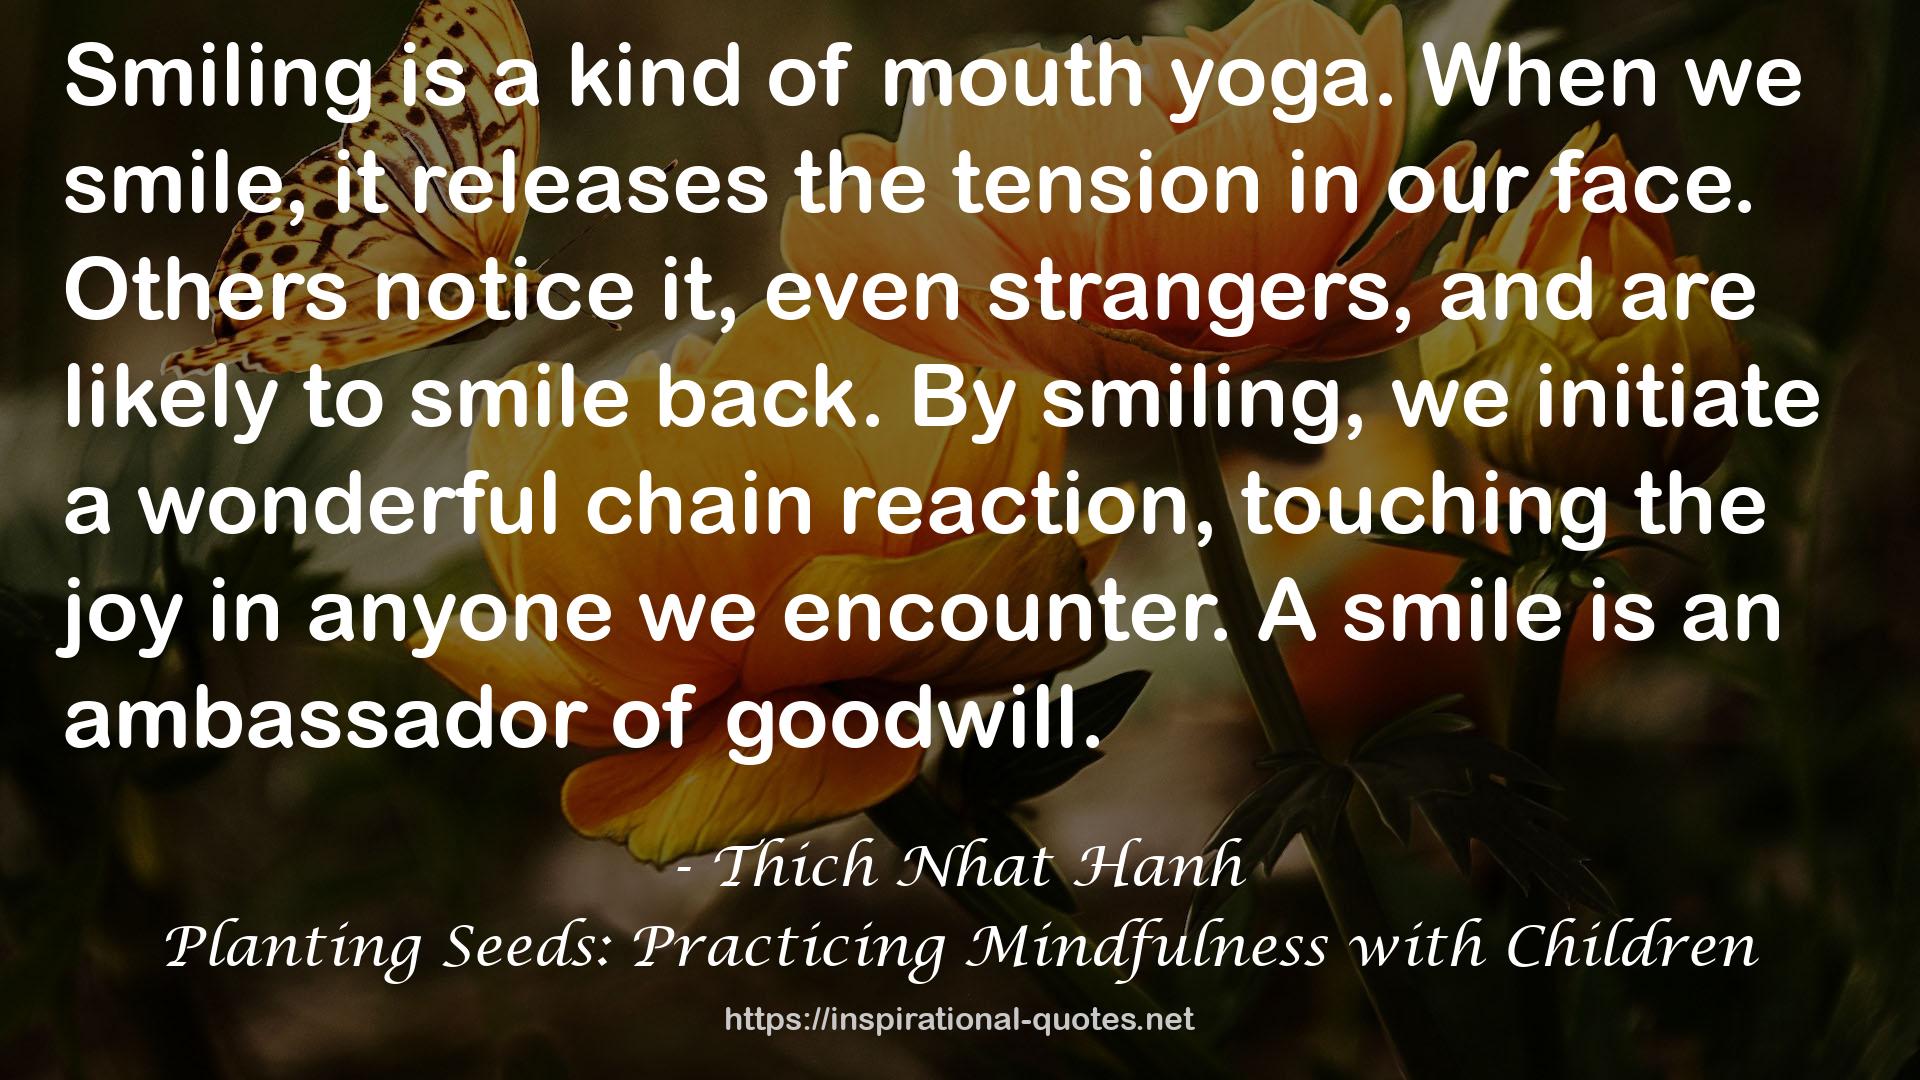 Planting Seeds: Practicing Mindfulness with Children QUOTES